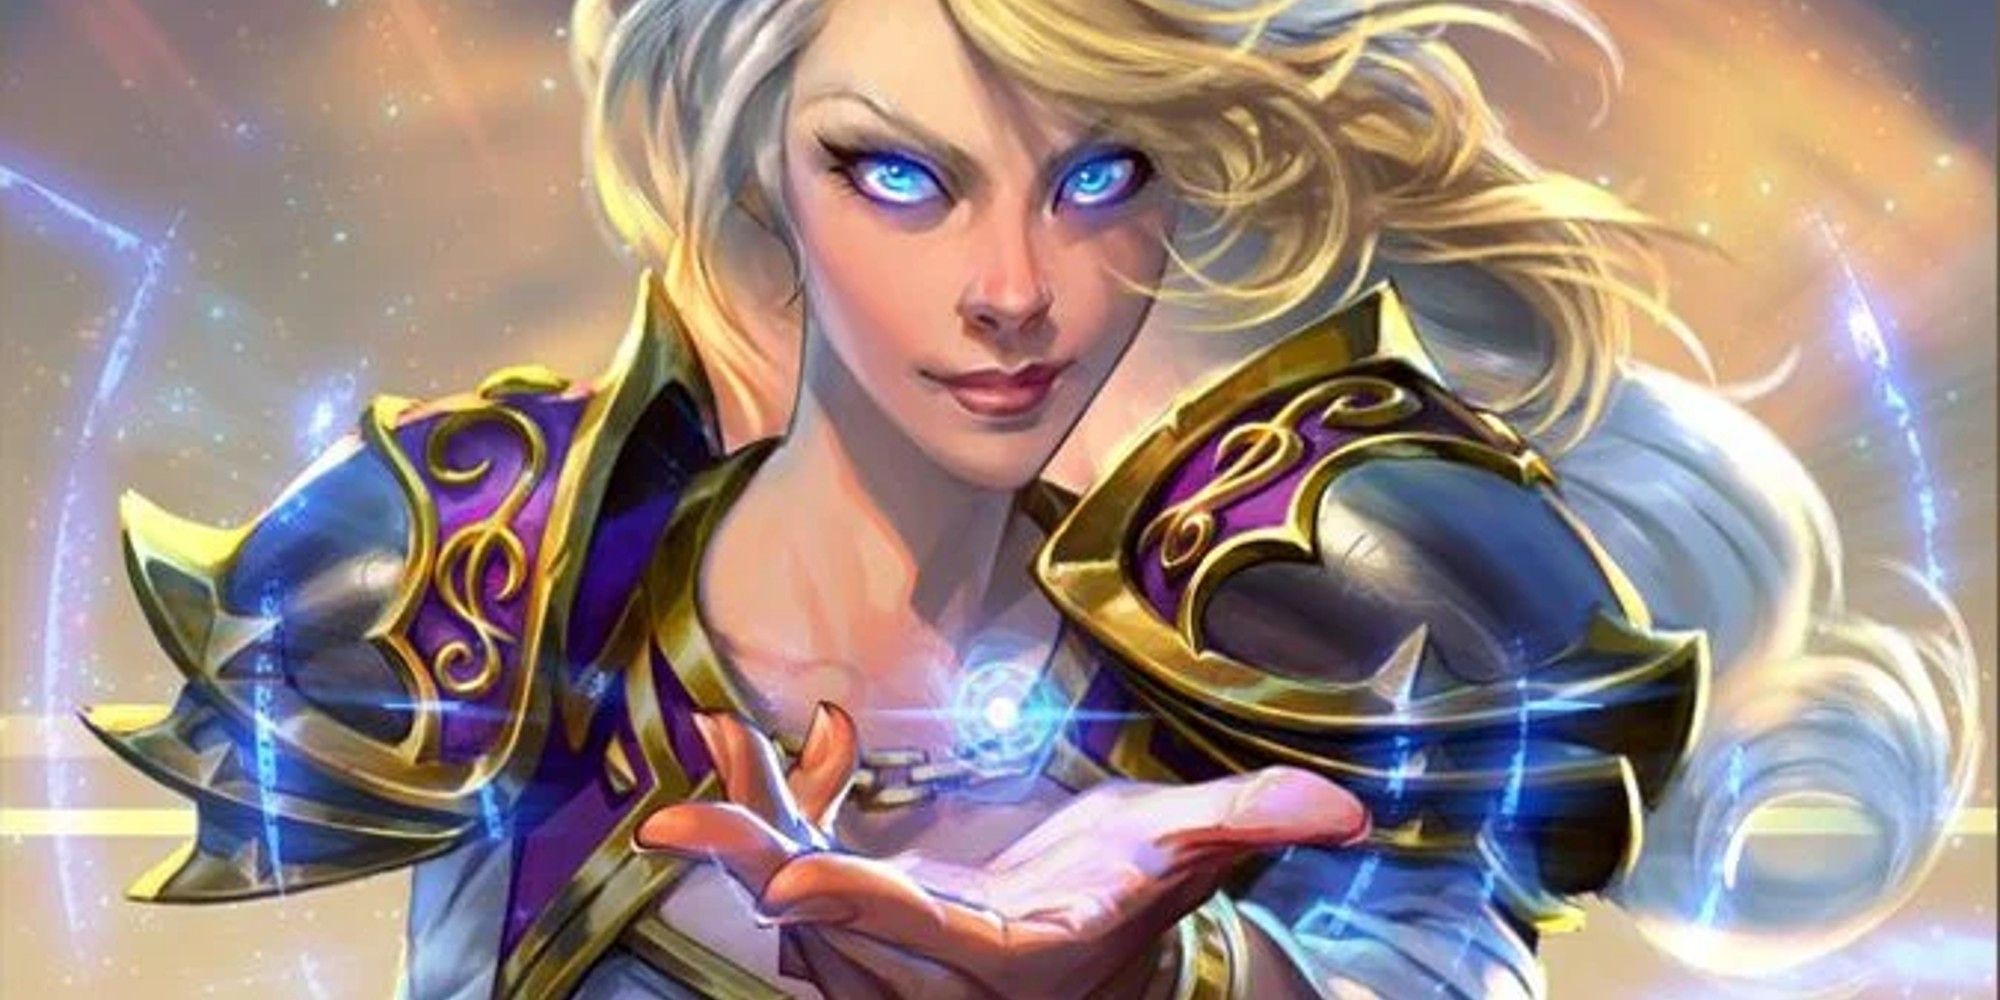 Official art of Jaina Proudmoore, a prominent frost mage in World of Warcraft.